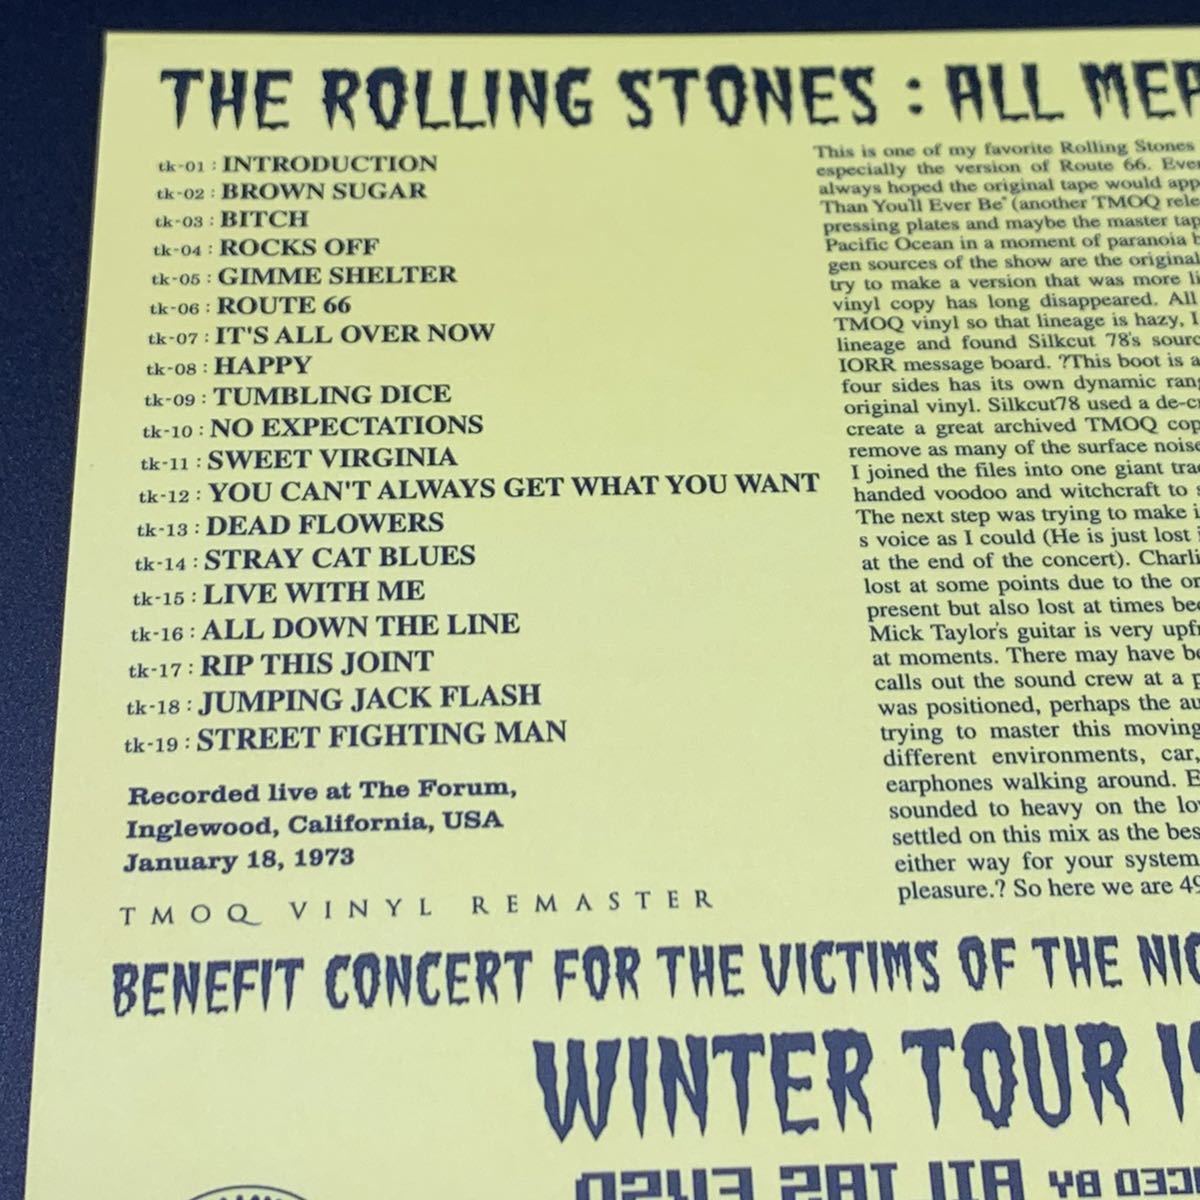 THE ROLLING STONES : WINTER TOUR 1973 「オール・ミート・ミュージック」 1CD 工場プレス銀盤CD ■欧米輸入限定盤■限定100セット 残少！_画像6